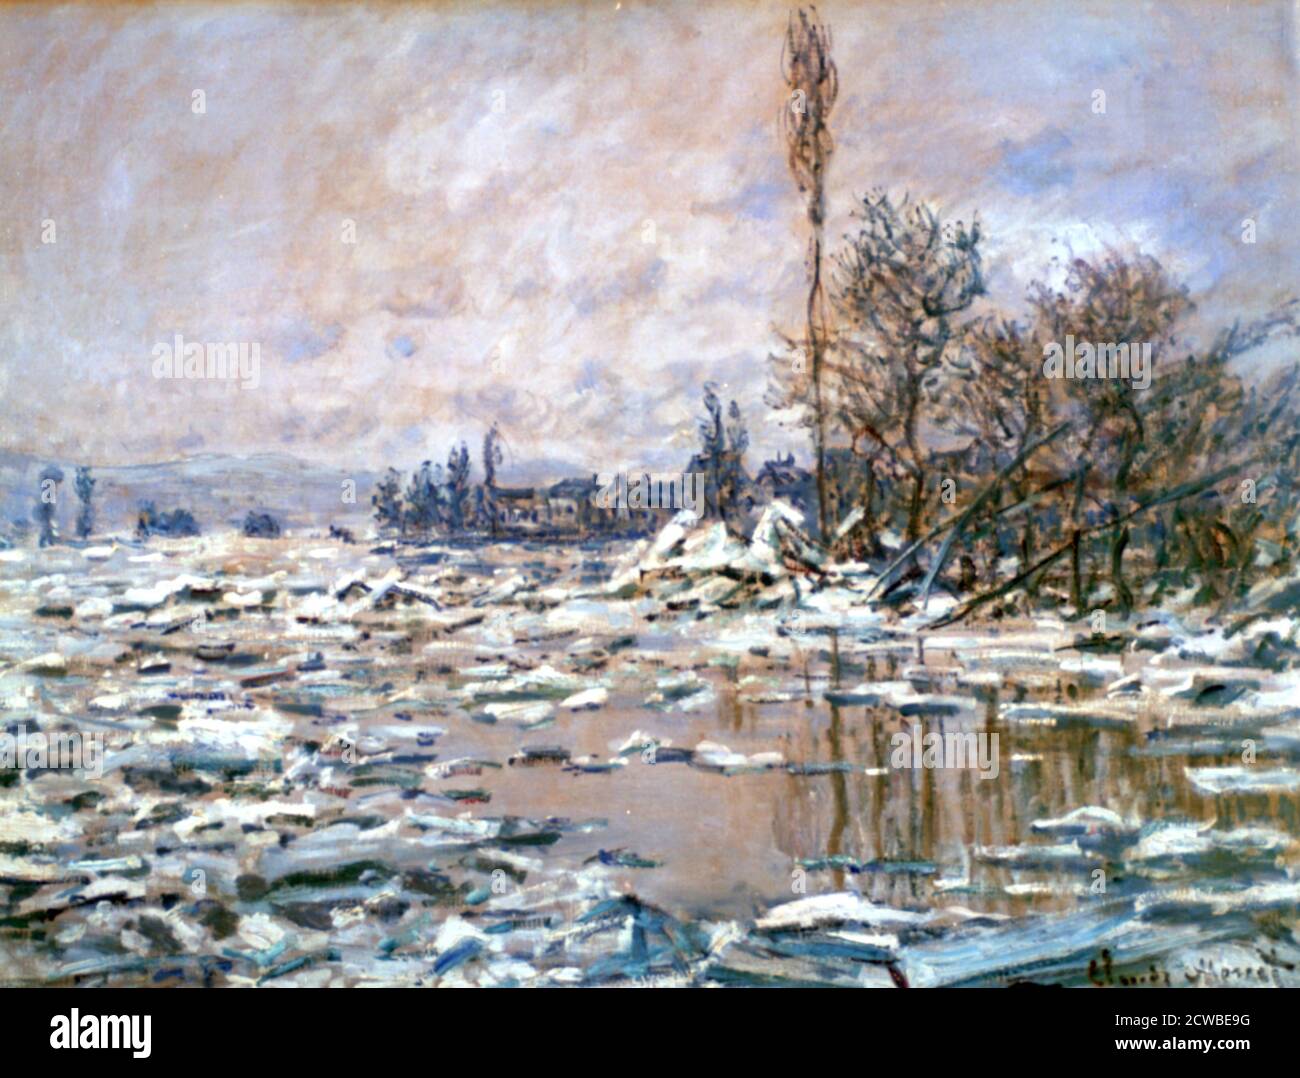 The Defrost', c20th Century. Artist: Claude Monet. Monet was a French painter, a founder of French Impressionist painting and the most consistent and prolific practitioner of the movements philosophy. Stock Photo